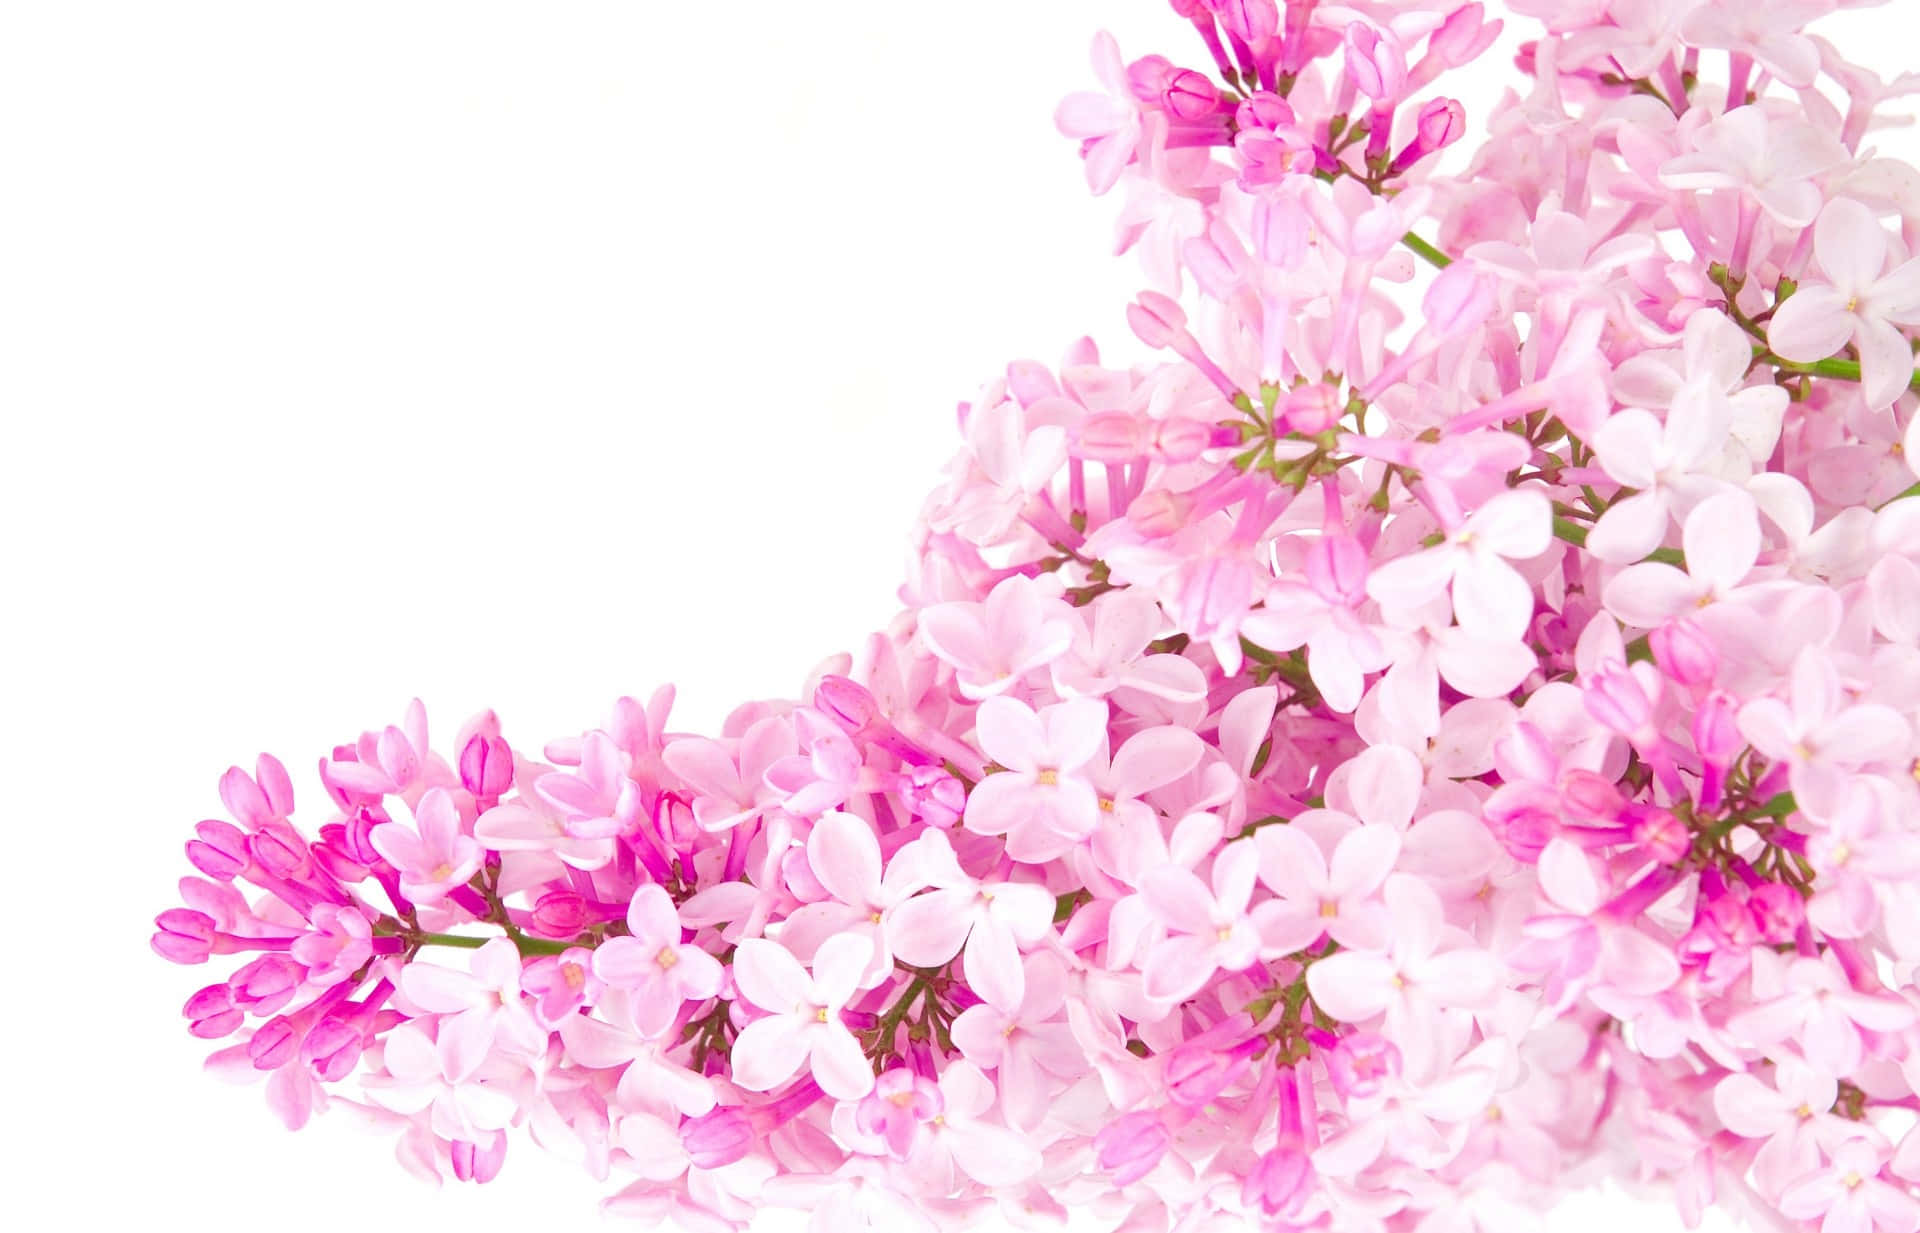 Captivating Floral Wallpaper for Tumblr Users